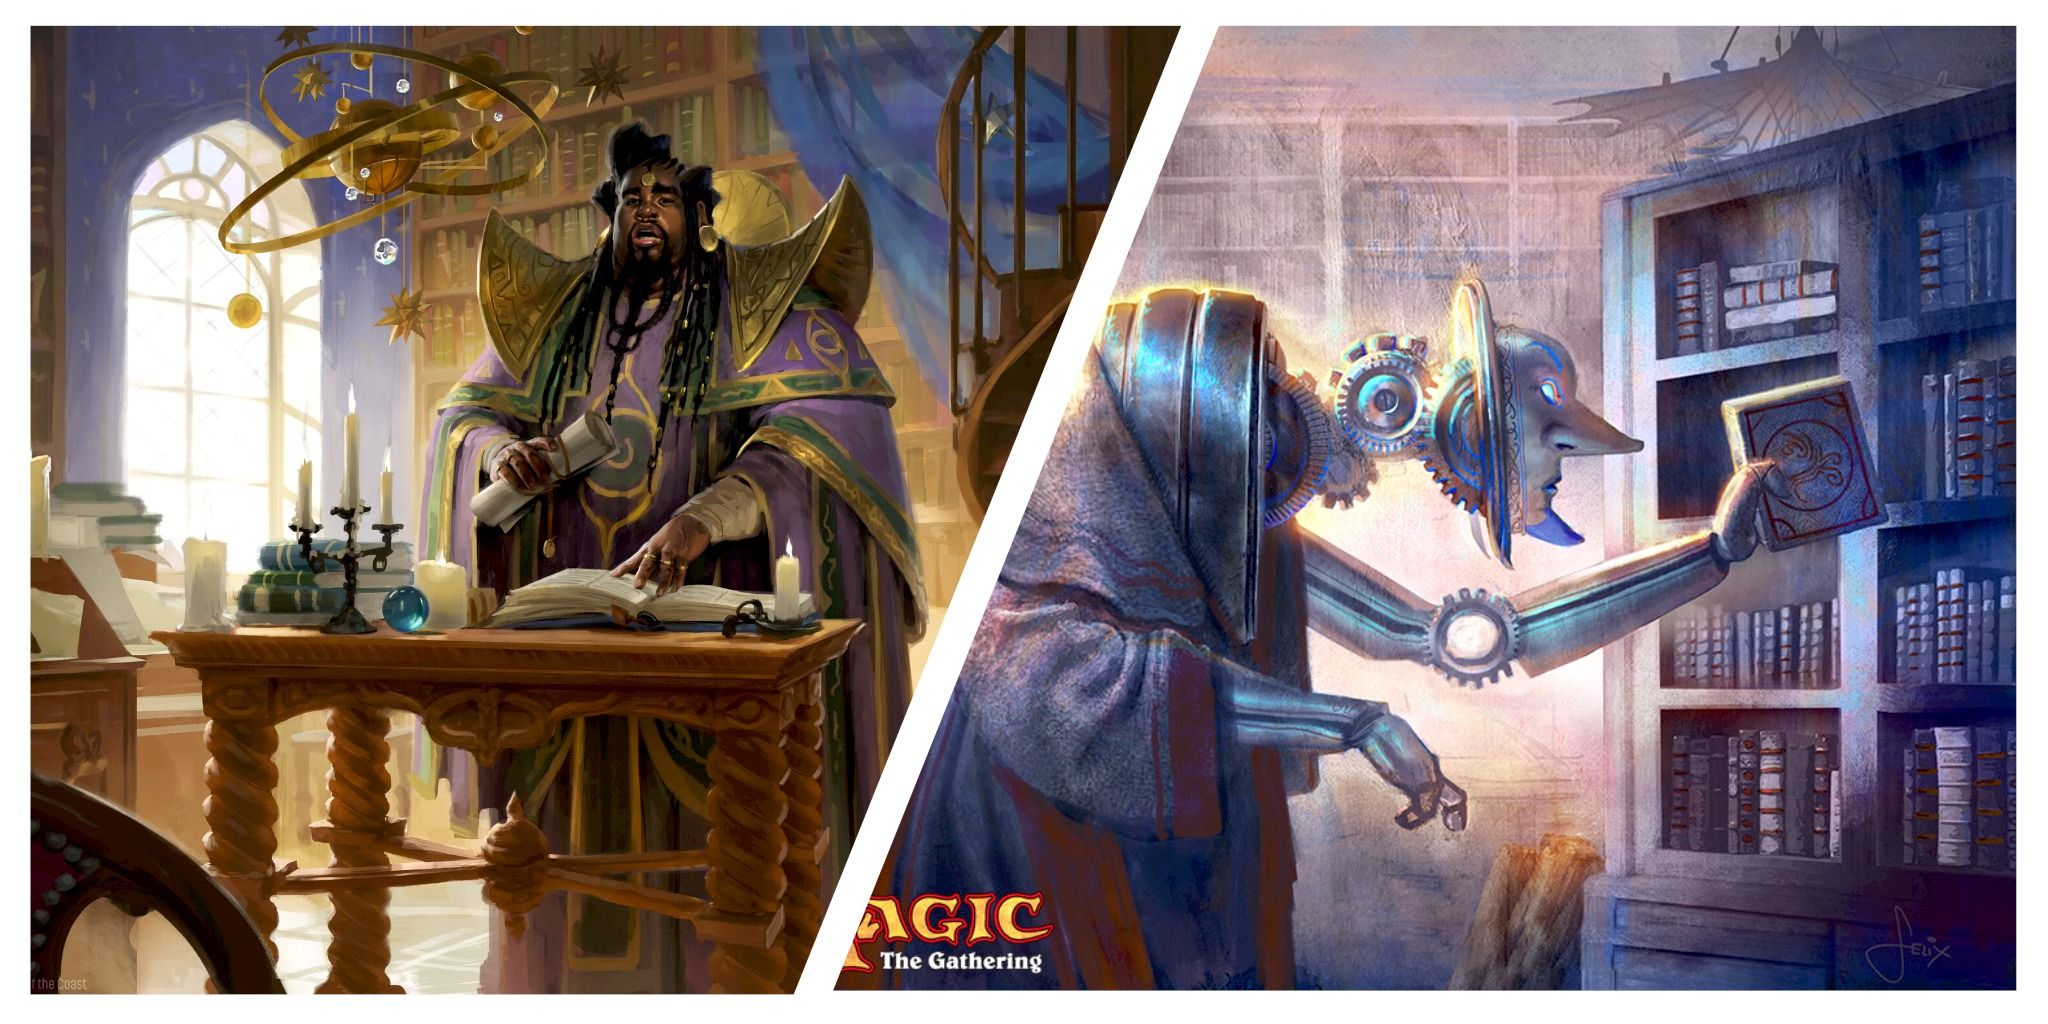 Robot librarian and Baldur's Gate commander from Magic: The Gathering